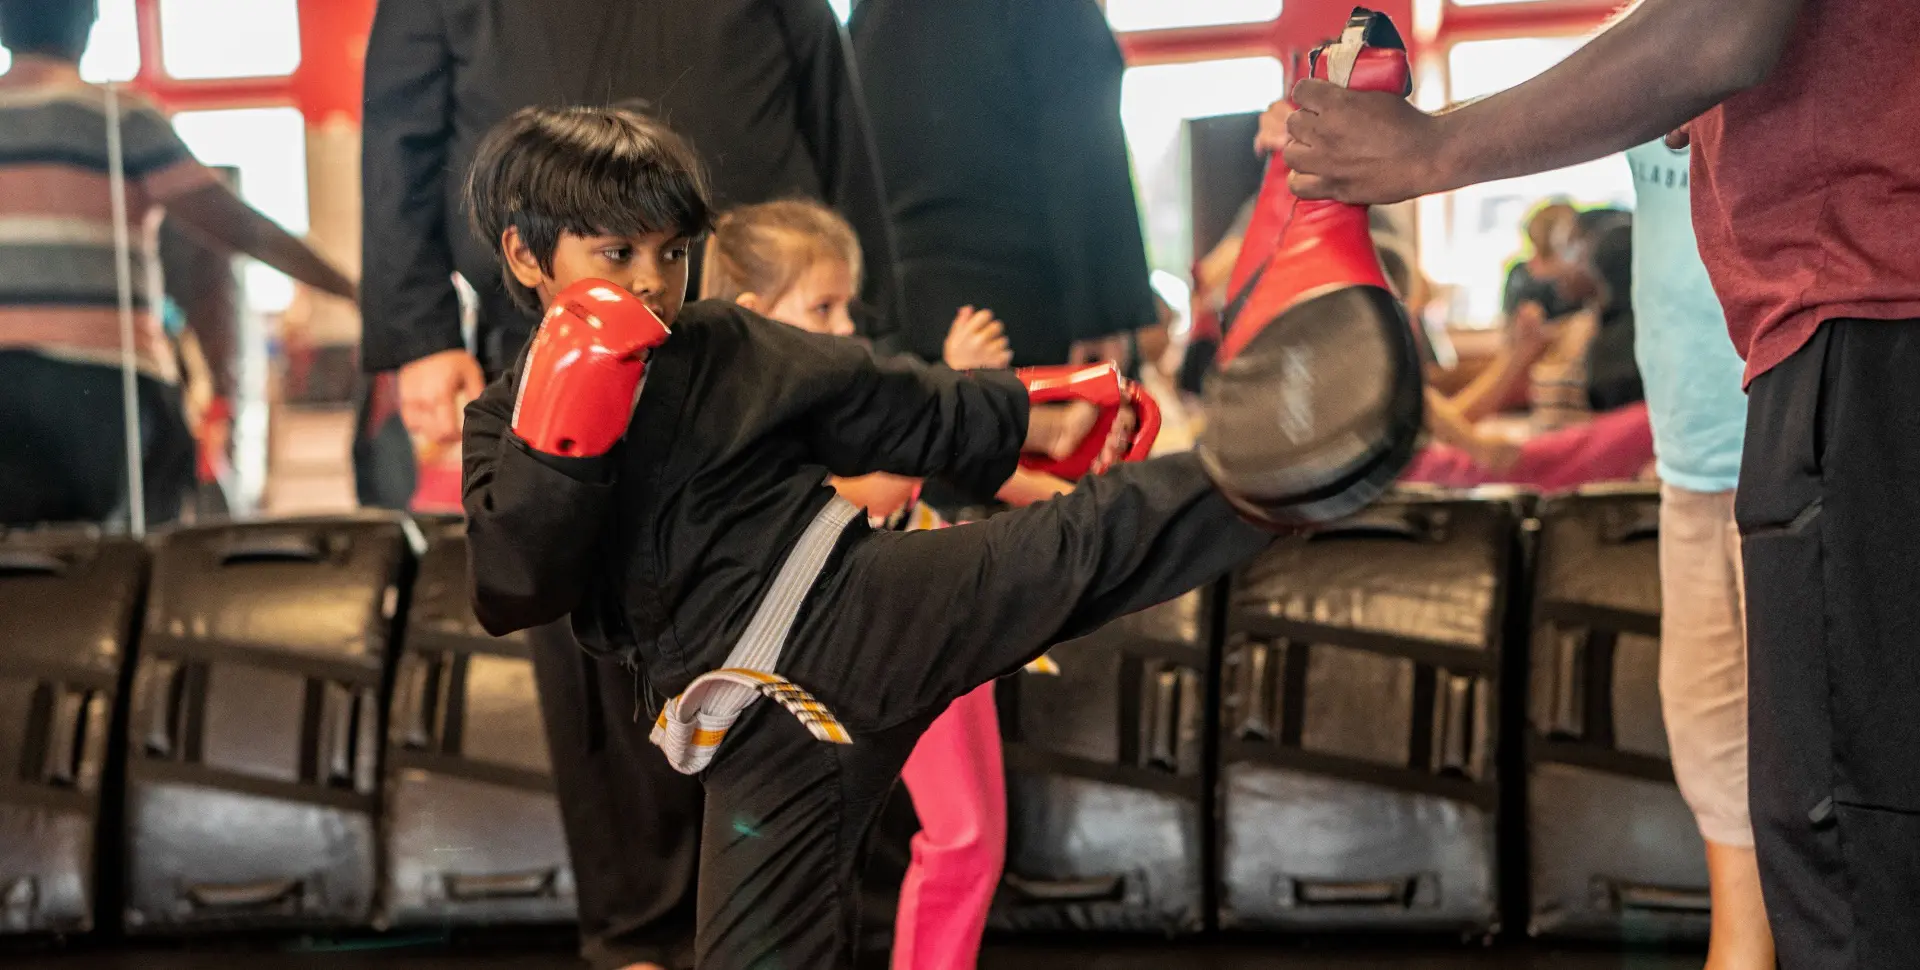 A young boy is kicking around with his red boxing gloves.